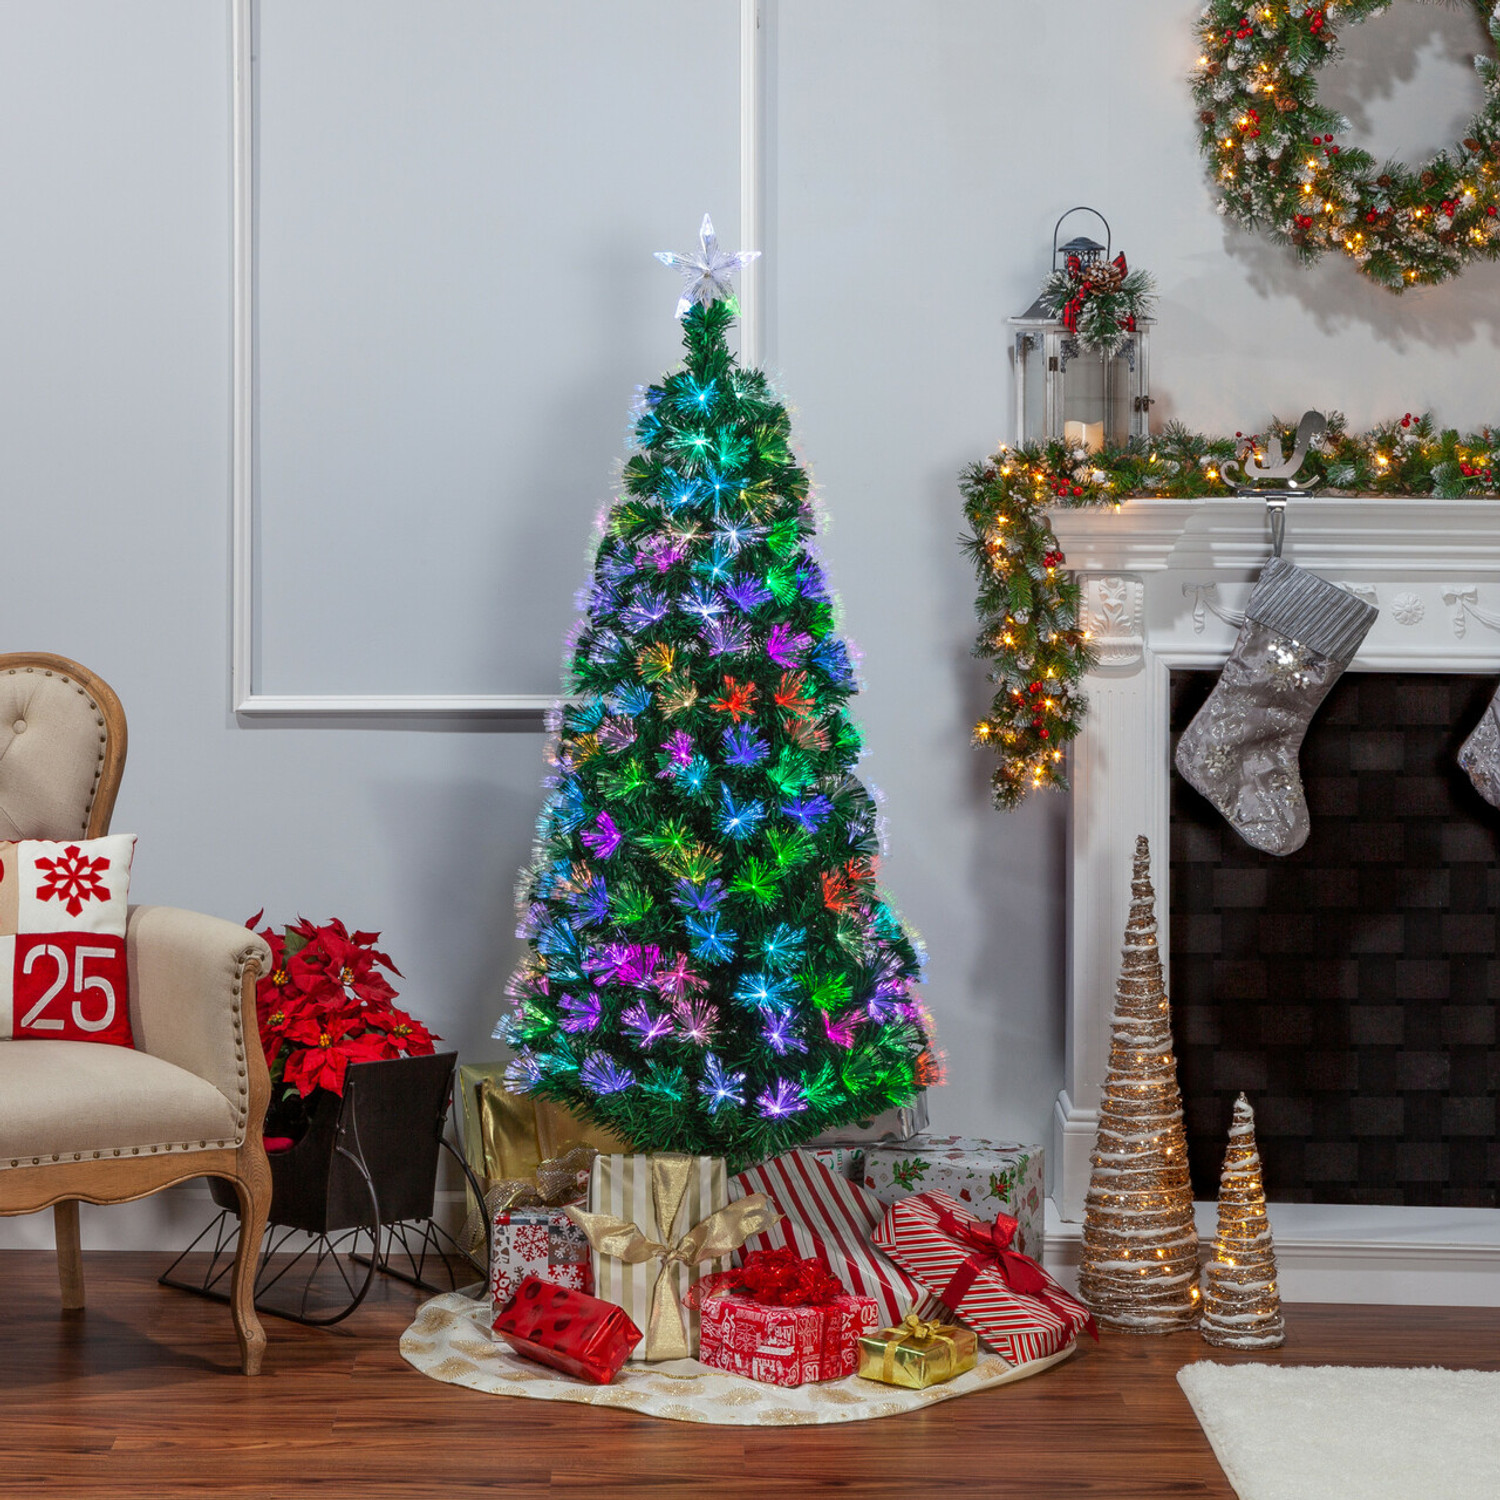 Vintage Styrofoam Christmas tree with tinsel and vintage Color